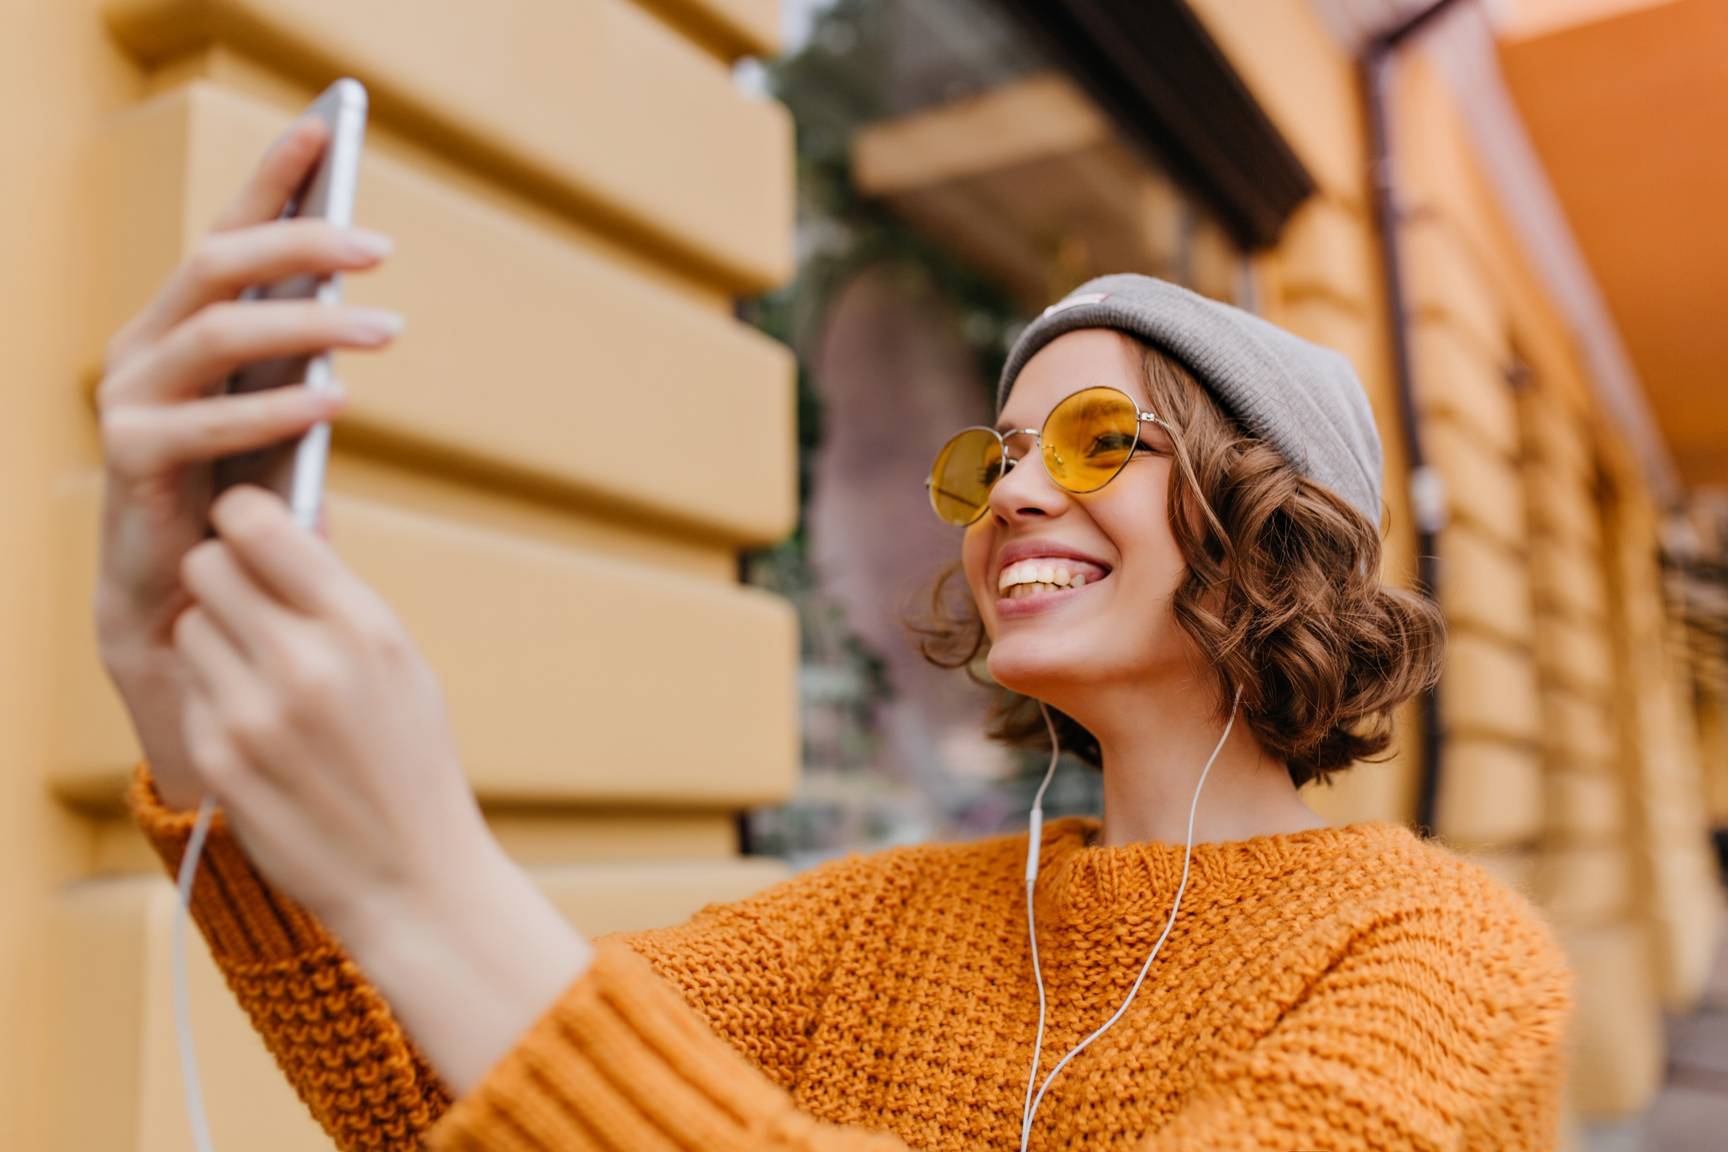 Lovely white girl with curly hairstyle making selfie in new outfit enjoying good weather. Outdoor portrait of ecstatic young woman in trendy sweater taking picture of herself beside old building.